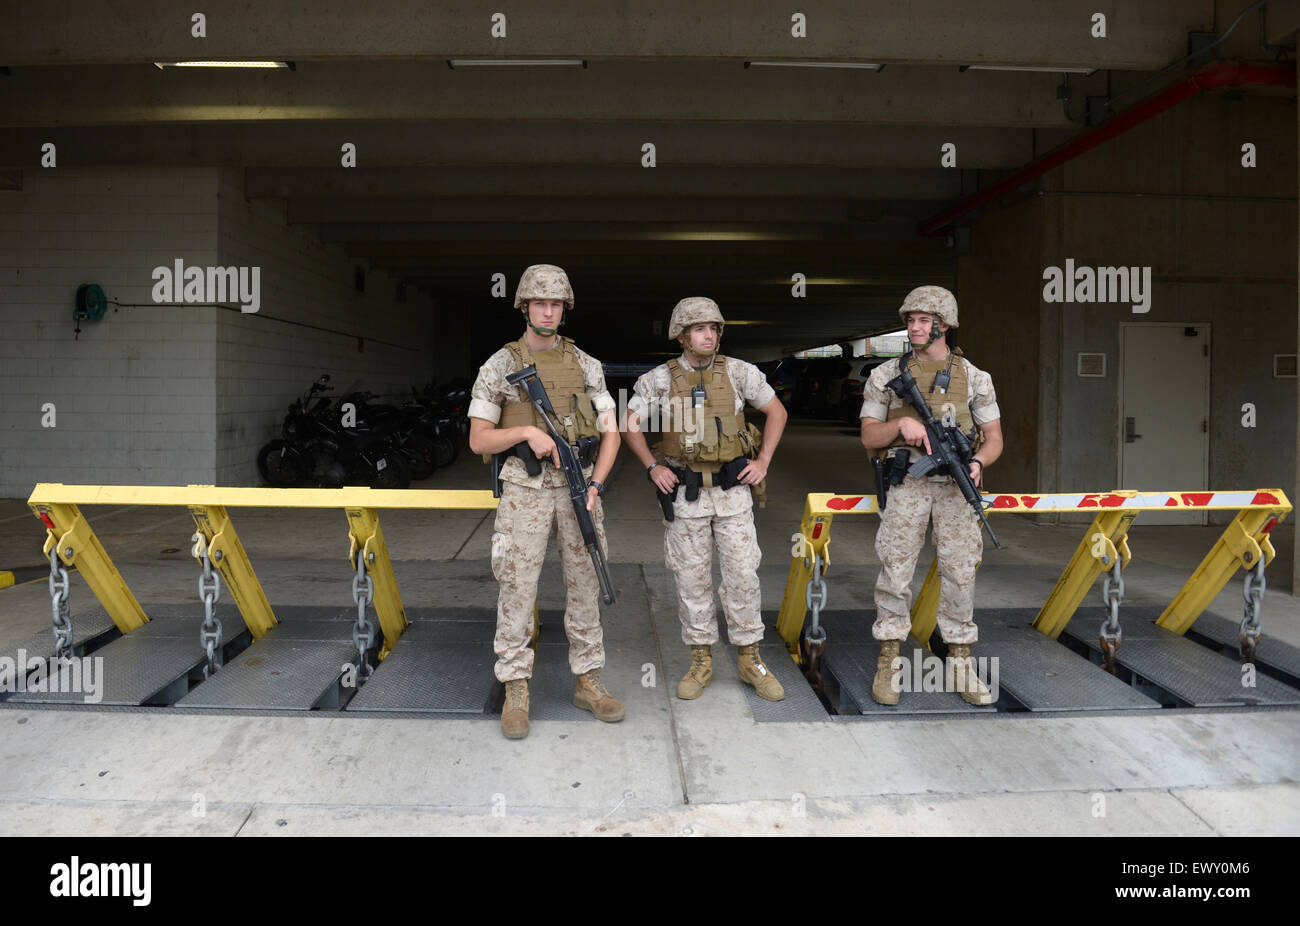 Washington, DC, USA. 2nd July, 2015. Soldiers guard near the scene of a shooting at Navy Yard in Washington, DC, the United States, July 2, 2015. Police were responding to a report of an active shooter at the Washington Navy Yard in southeast of the U.S. capital Thursday morning, U.S. media reported. Credit:  Yin Bogu/Xinhua/Alamy Live News Stock Photo